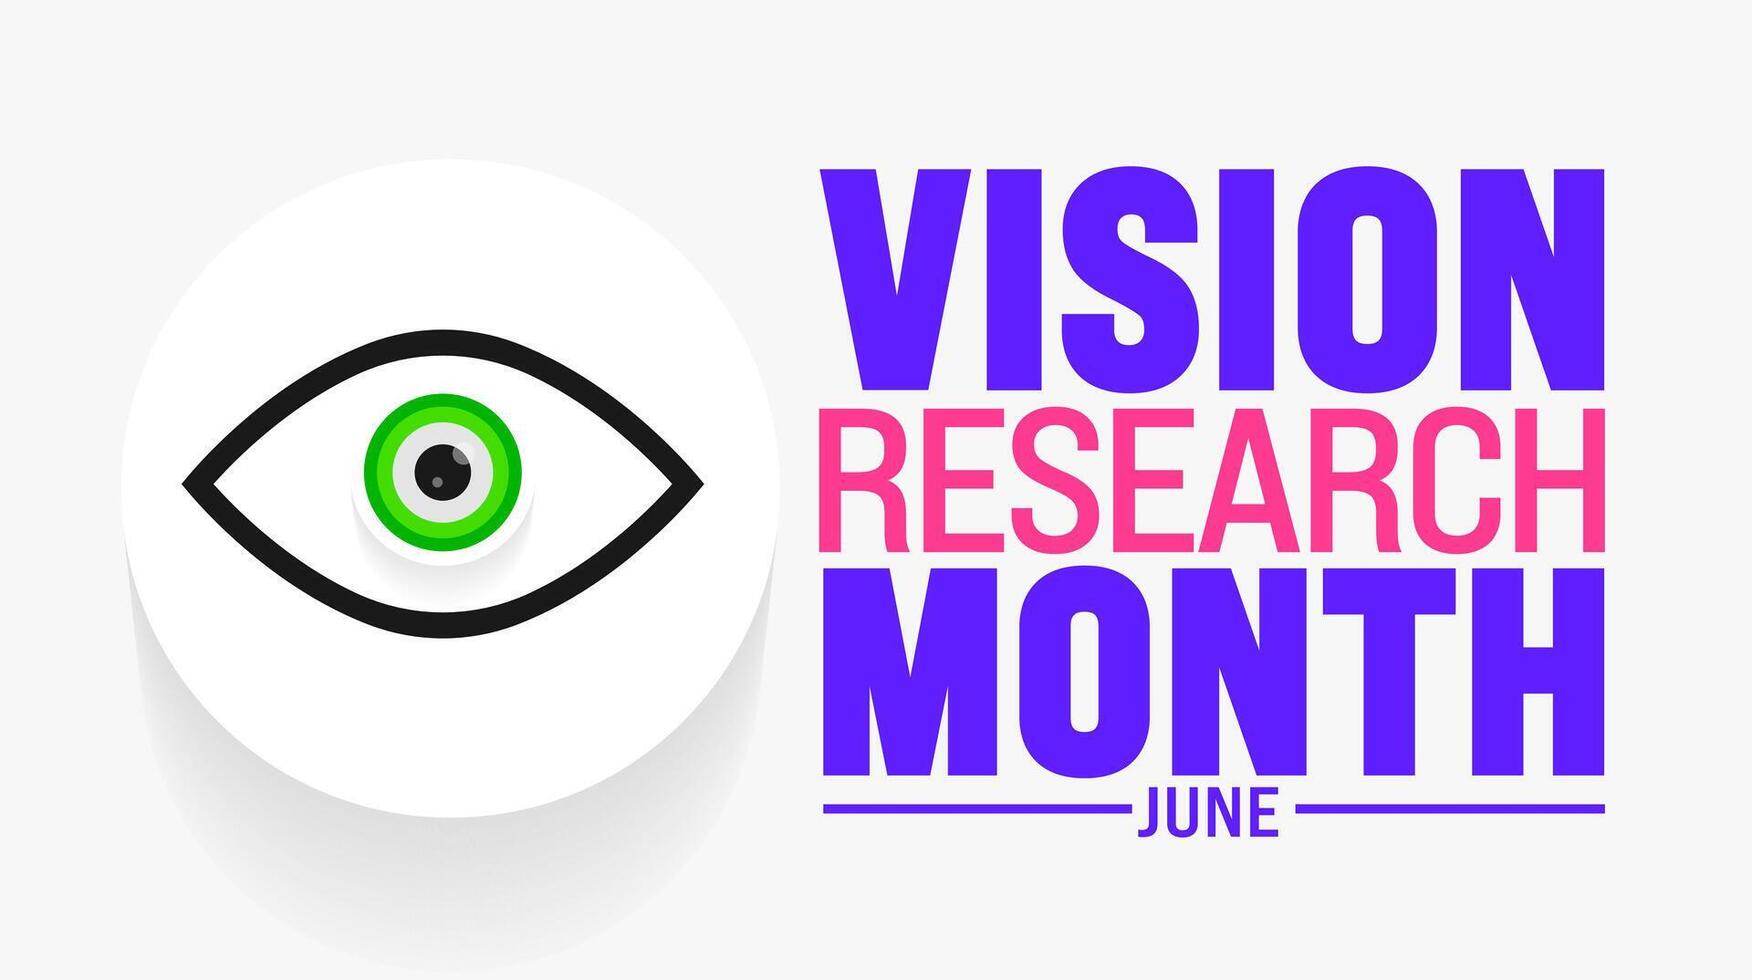 June is Vision Research Month background template. Holiday concept. use to background, banner, placard, card, and poster design template with text inscription and standard color. vector